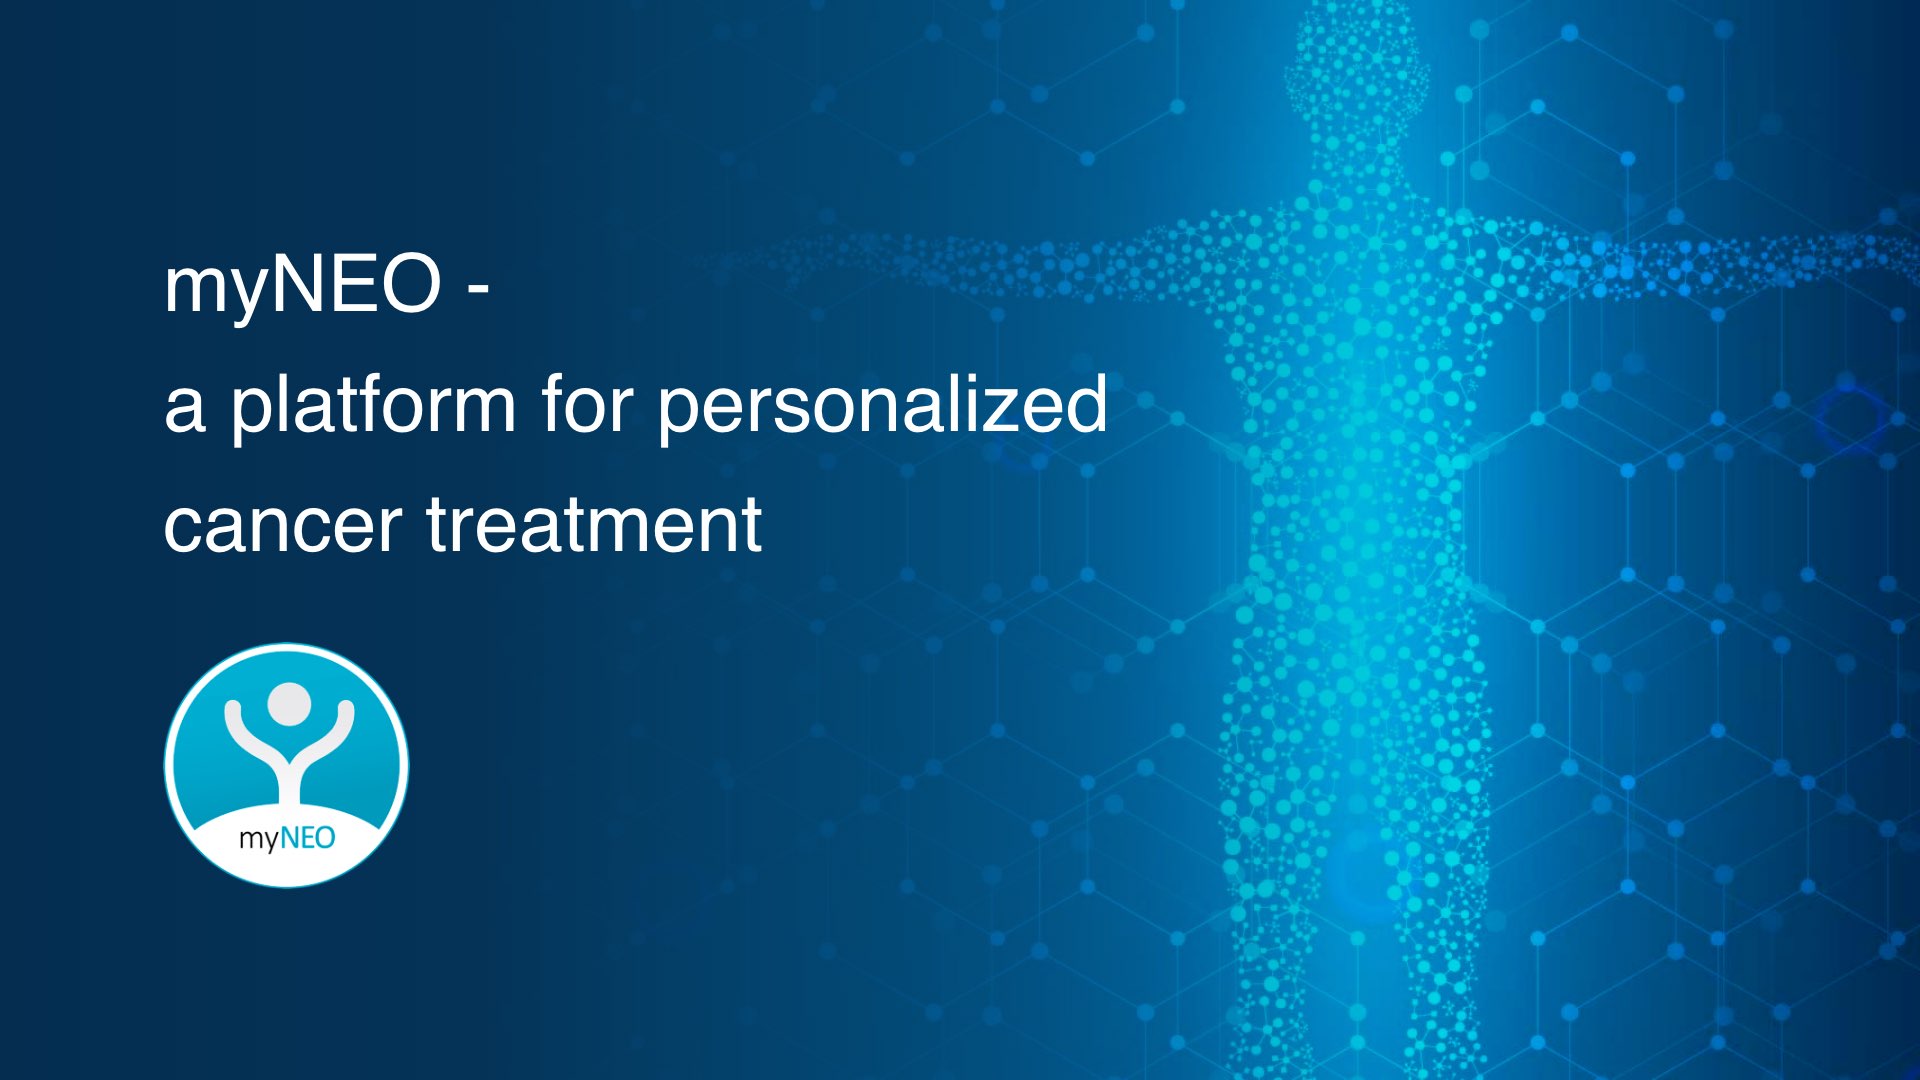 myNEO - a platform for personalized cancer treatment